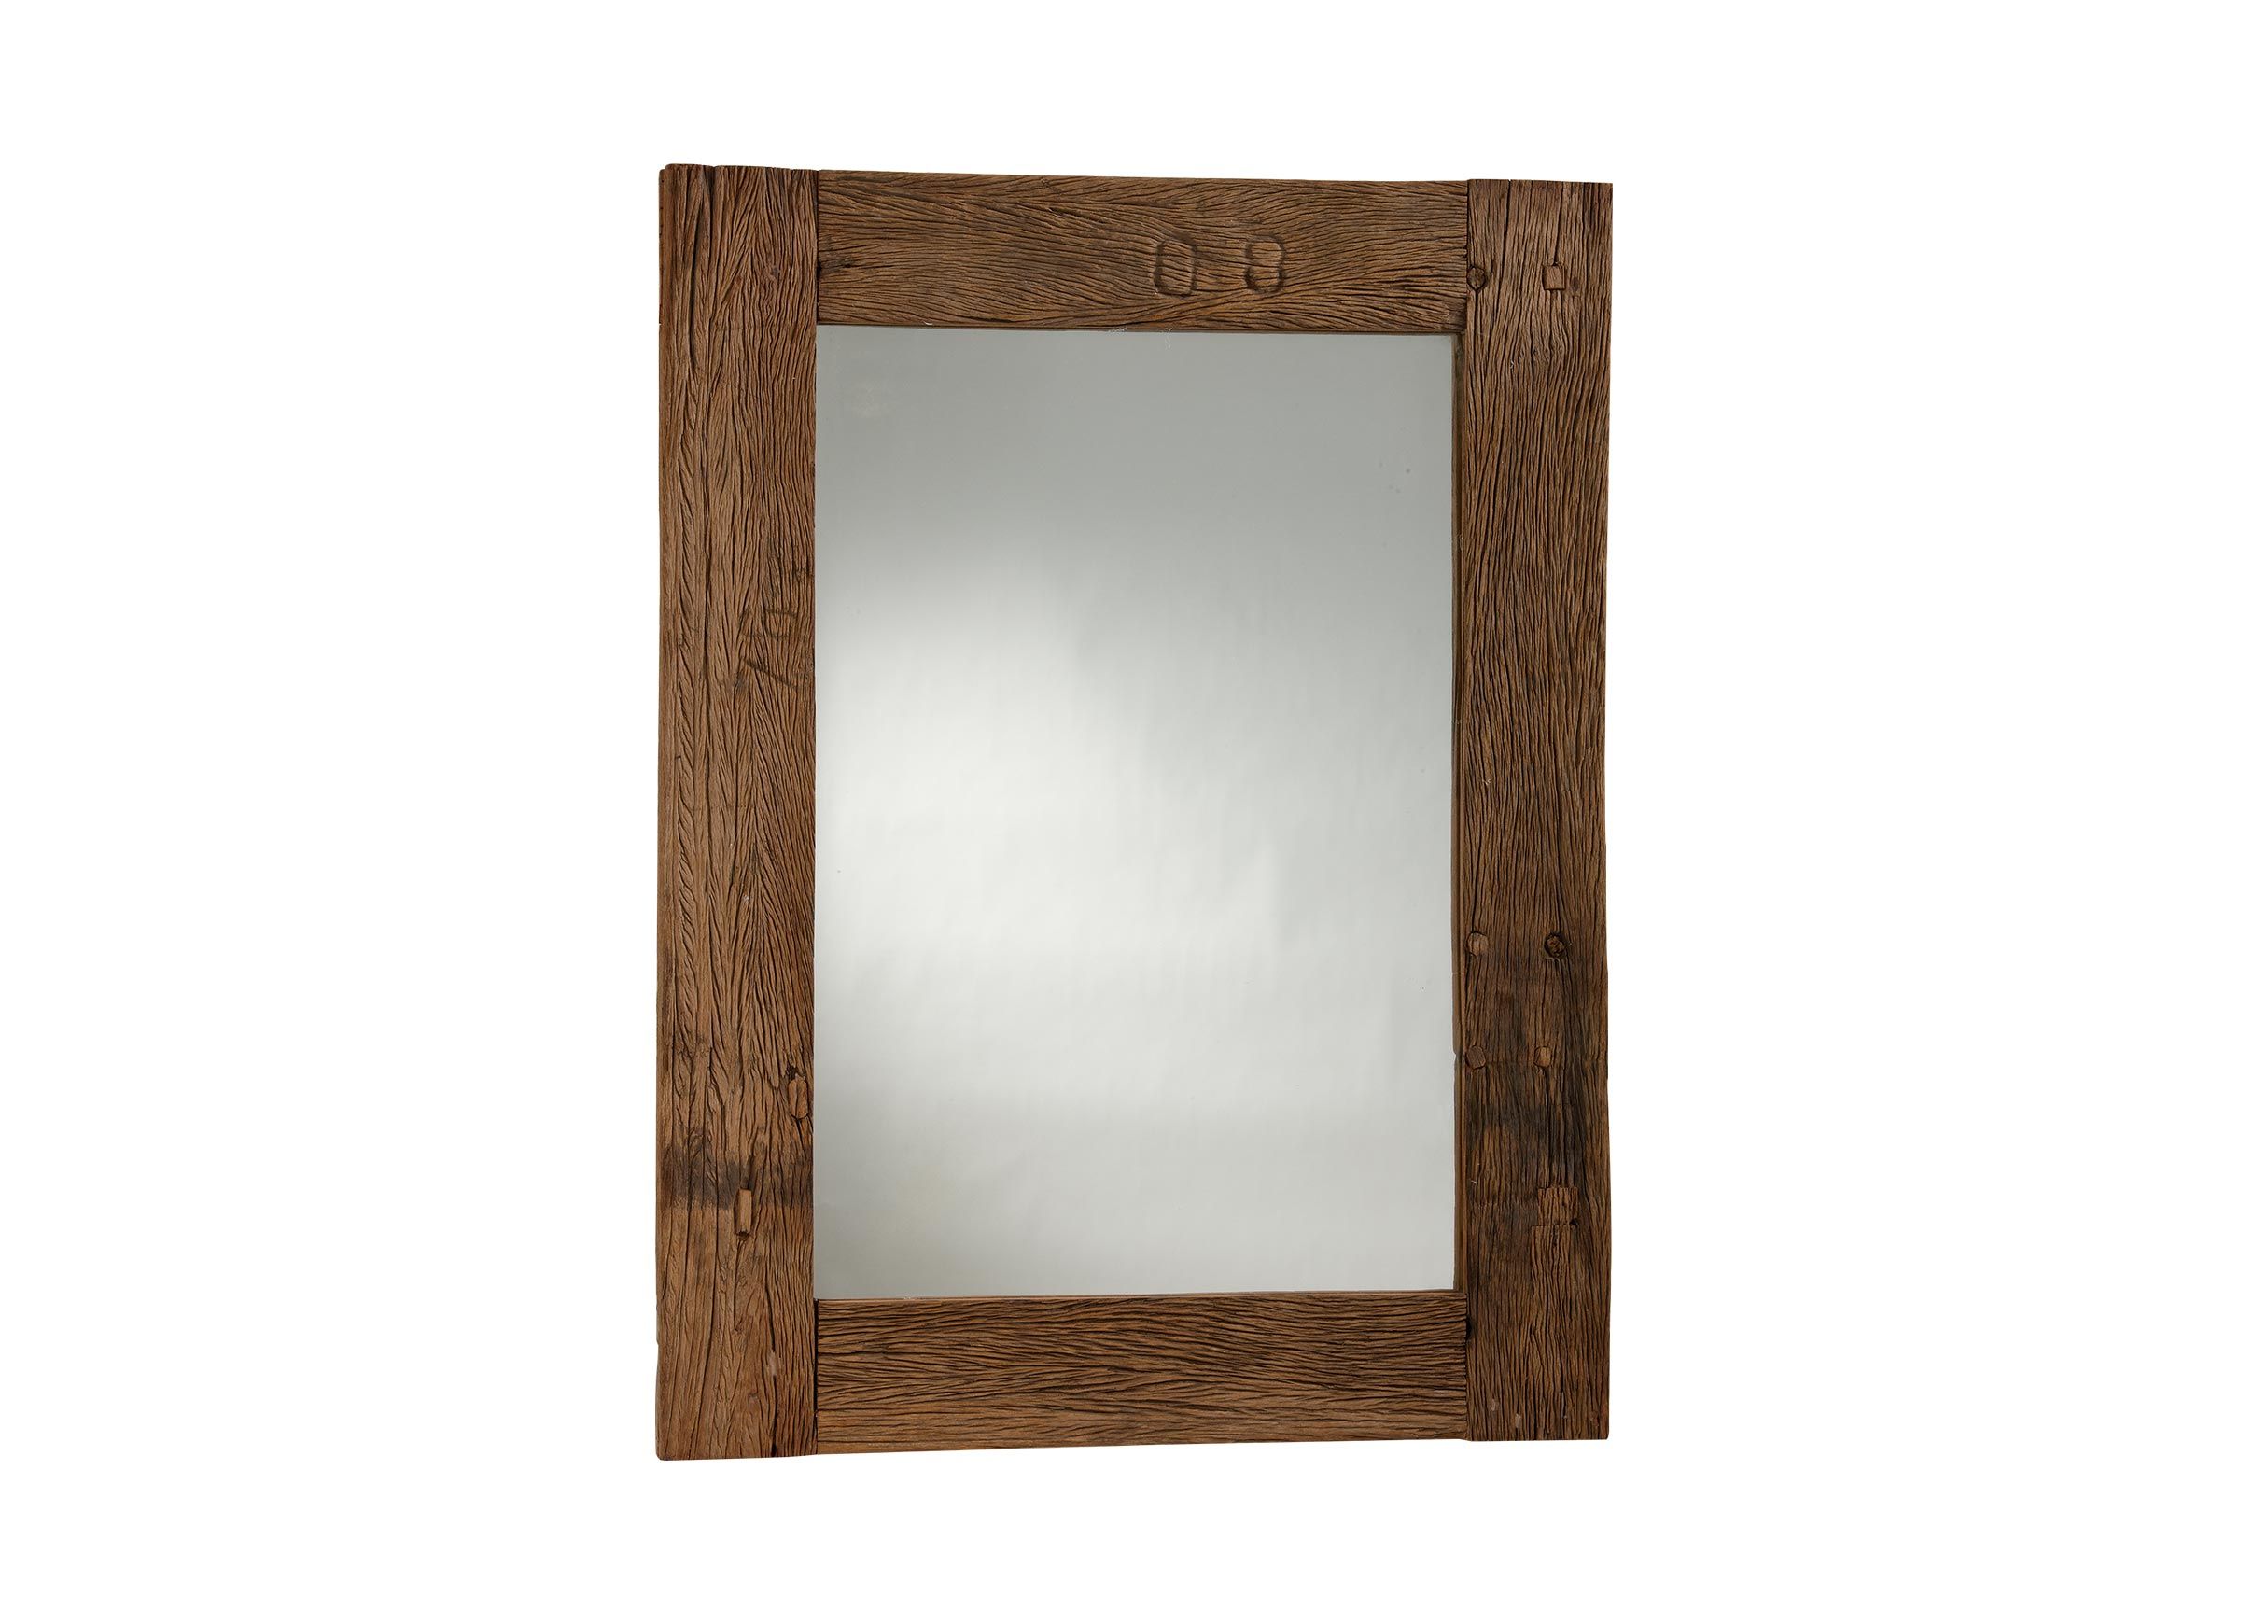 Reclaimed Wood Wall Mirror | Mirrors | Ethan Allen Pertaining To Gray Washed Wood Wall Mirrors (View 7 of 15)